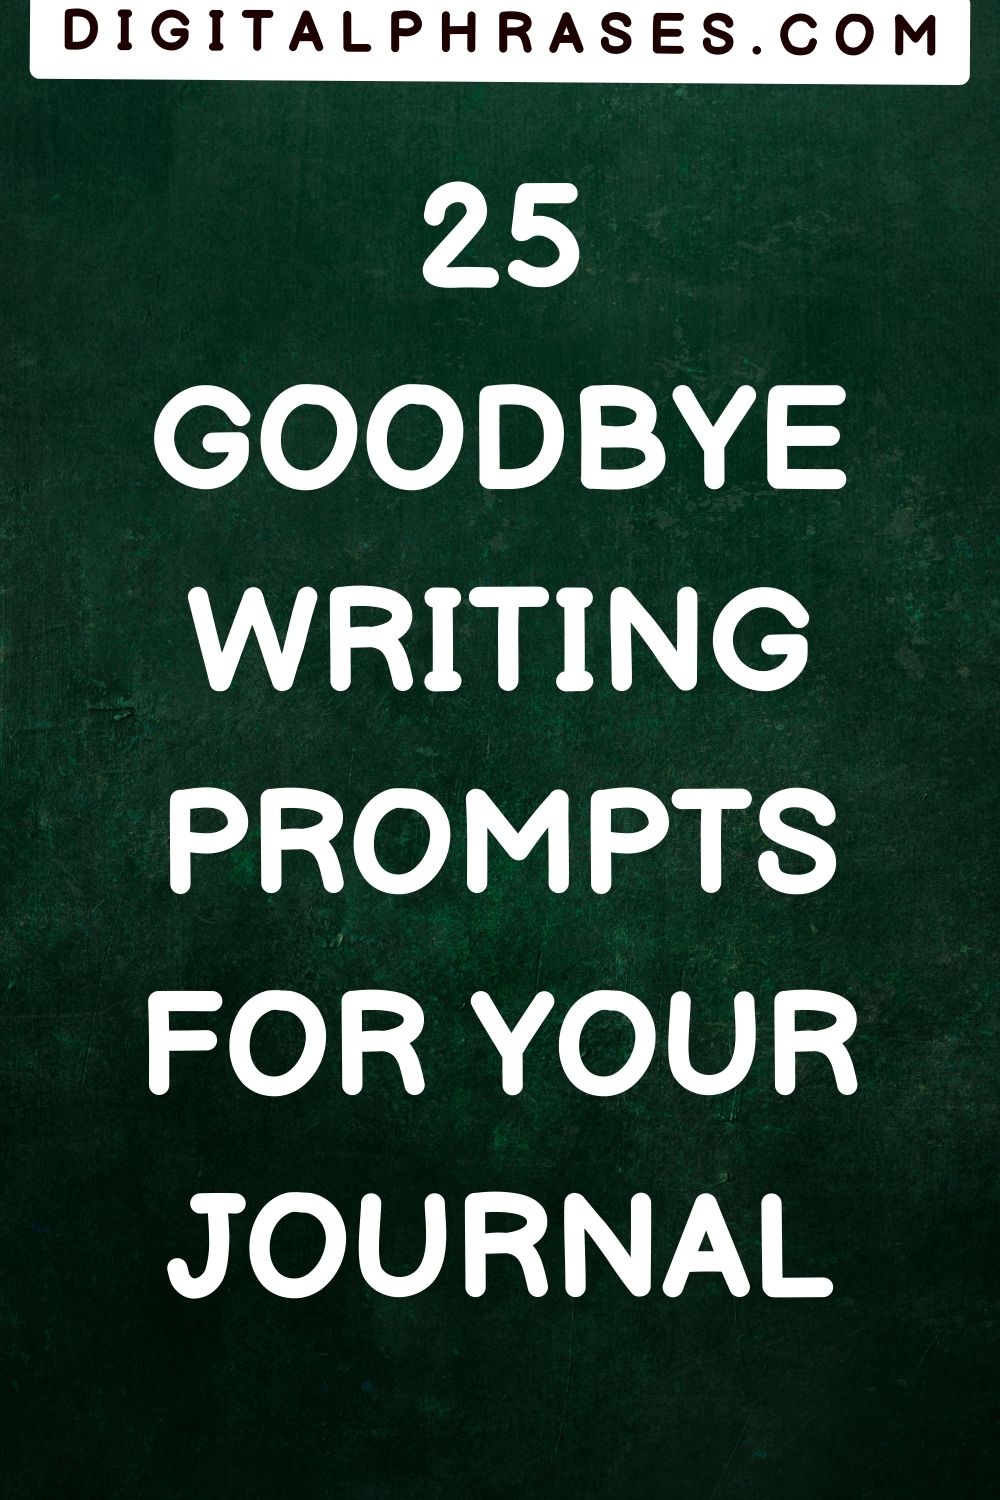 green background image with text - 25 Goodbye Writing Prompts For Your Journal